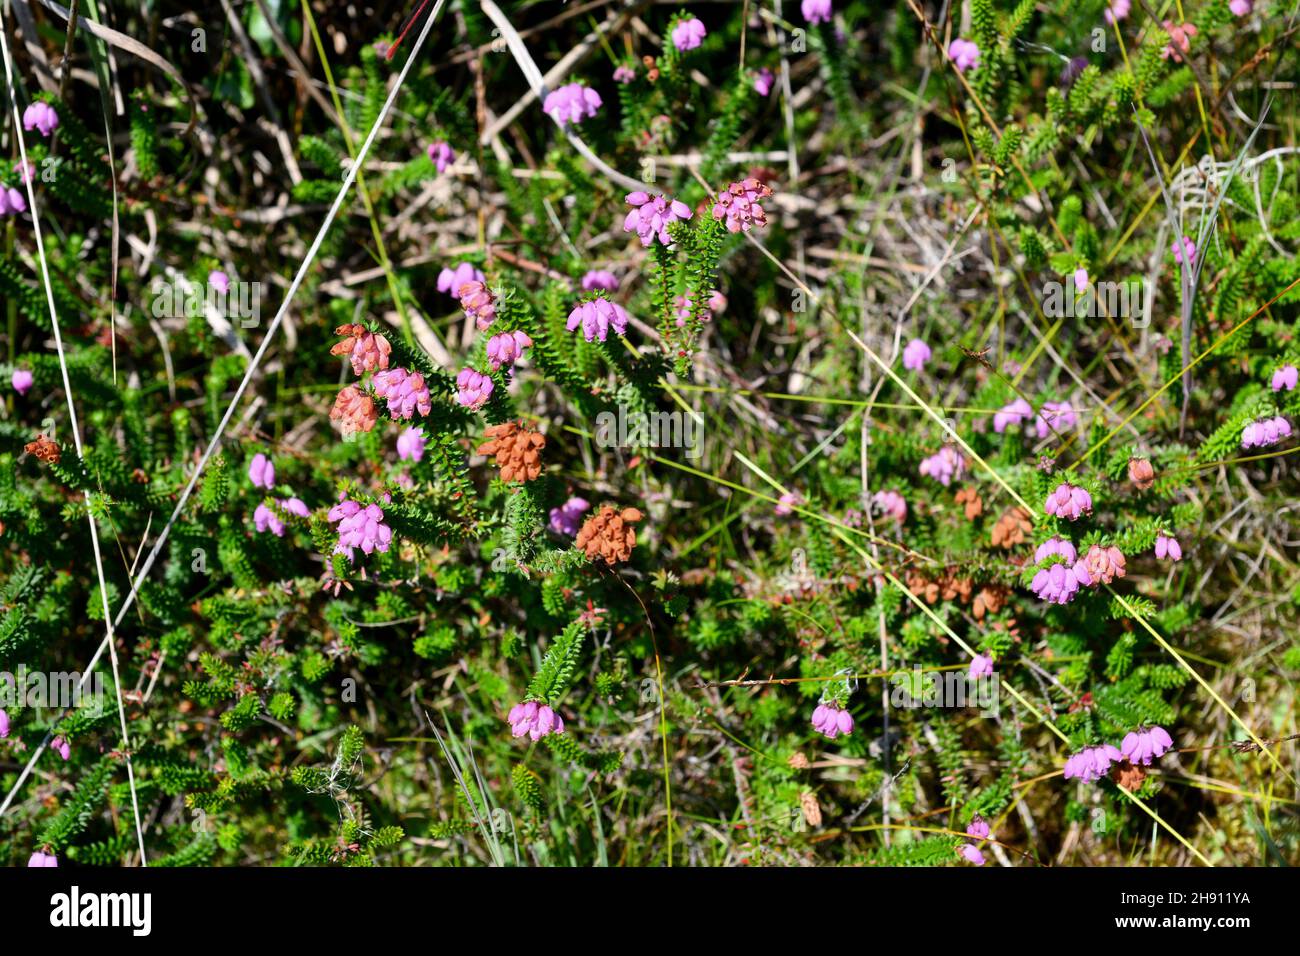 Erica mackaiana is a shrub native to northern Spain and Ireland. This photo was taken in Asturias, Spain. Stock Photo